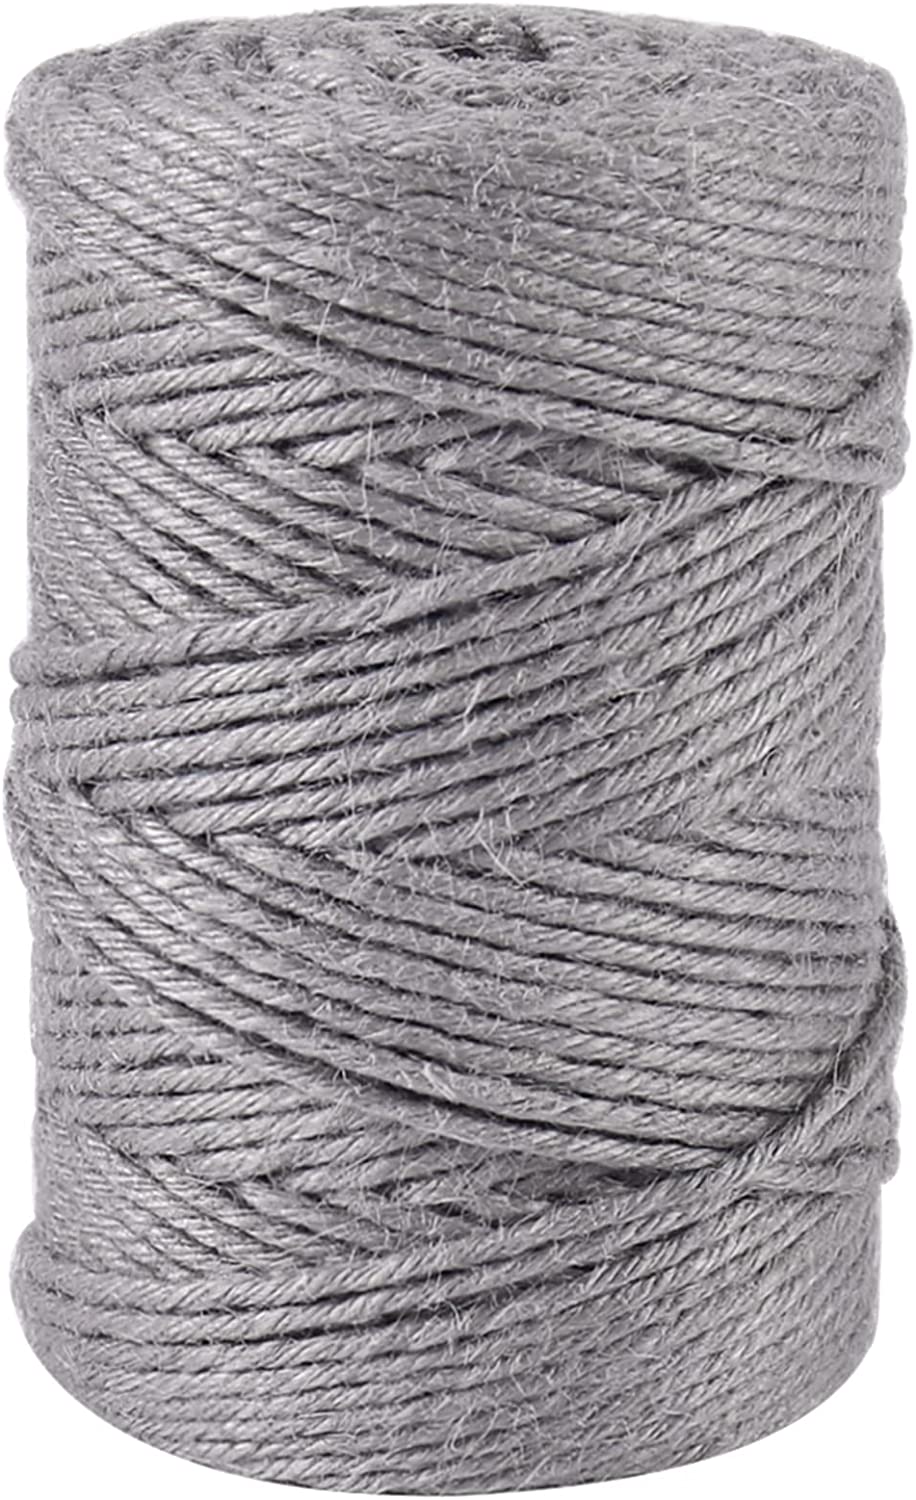 164 Ft x 10MM Natural Jute Twine, 3/8 Inch Twisted Jute Rope Hemp Rope,  Strong Burlap Cord for DIY Crafts Gardening Hammock Home Decorating Gift